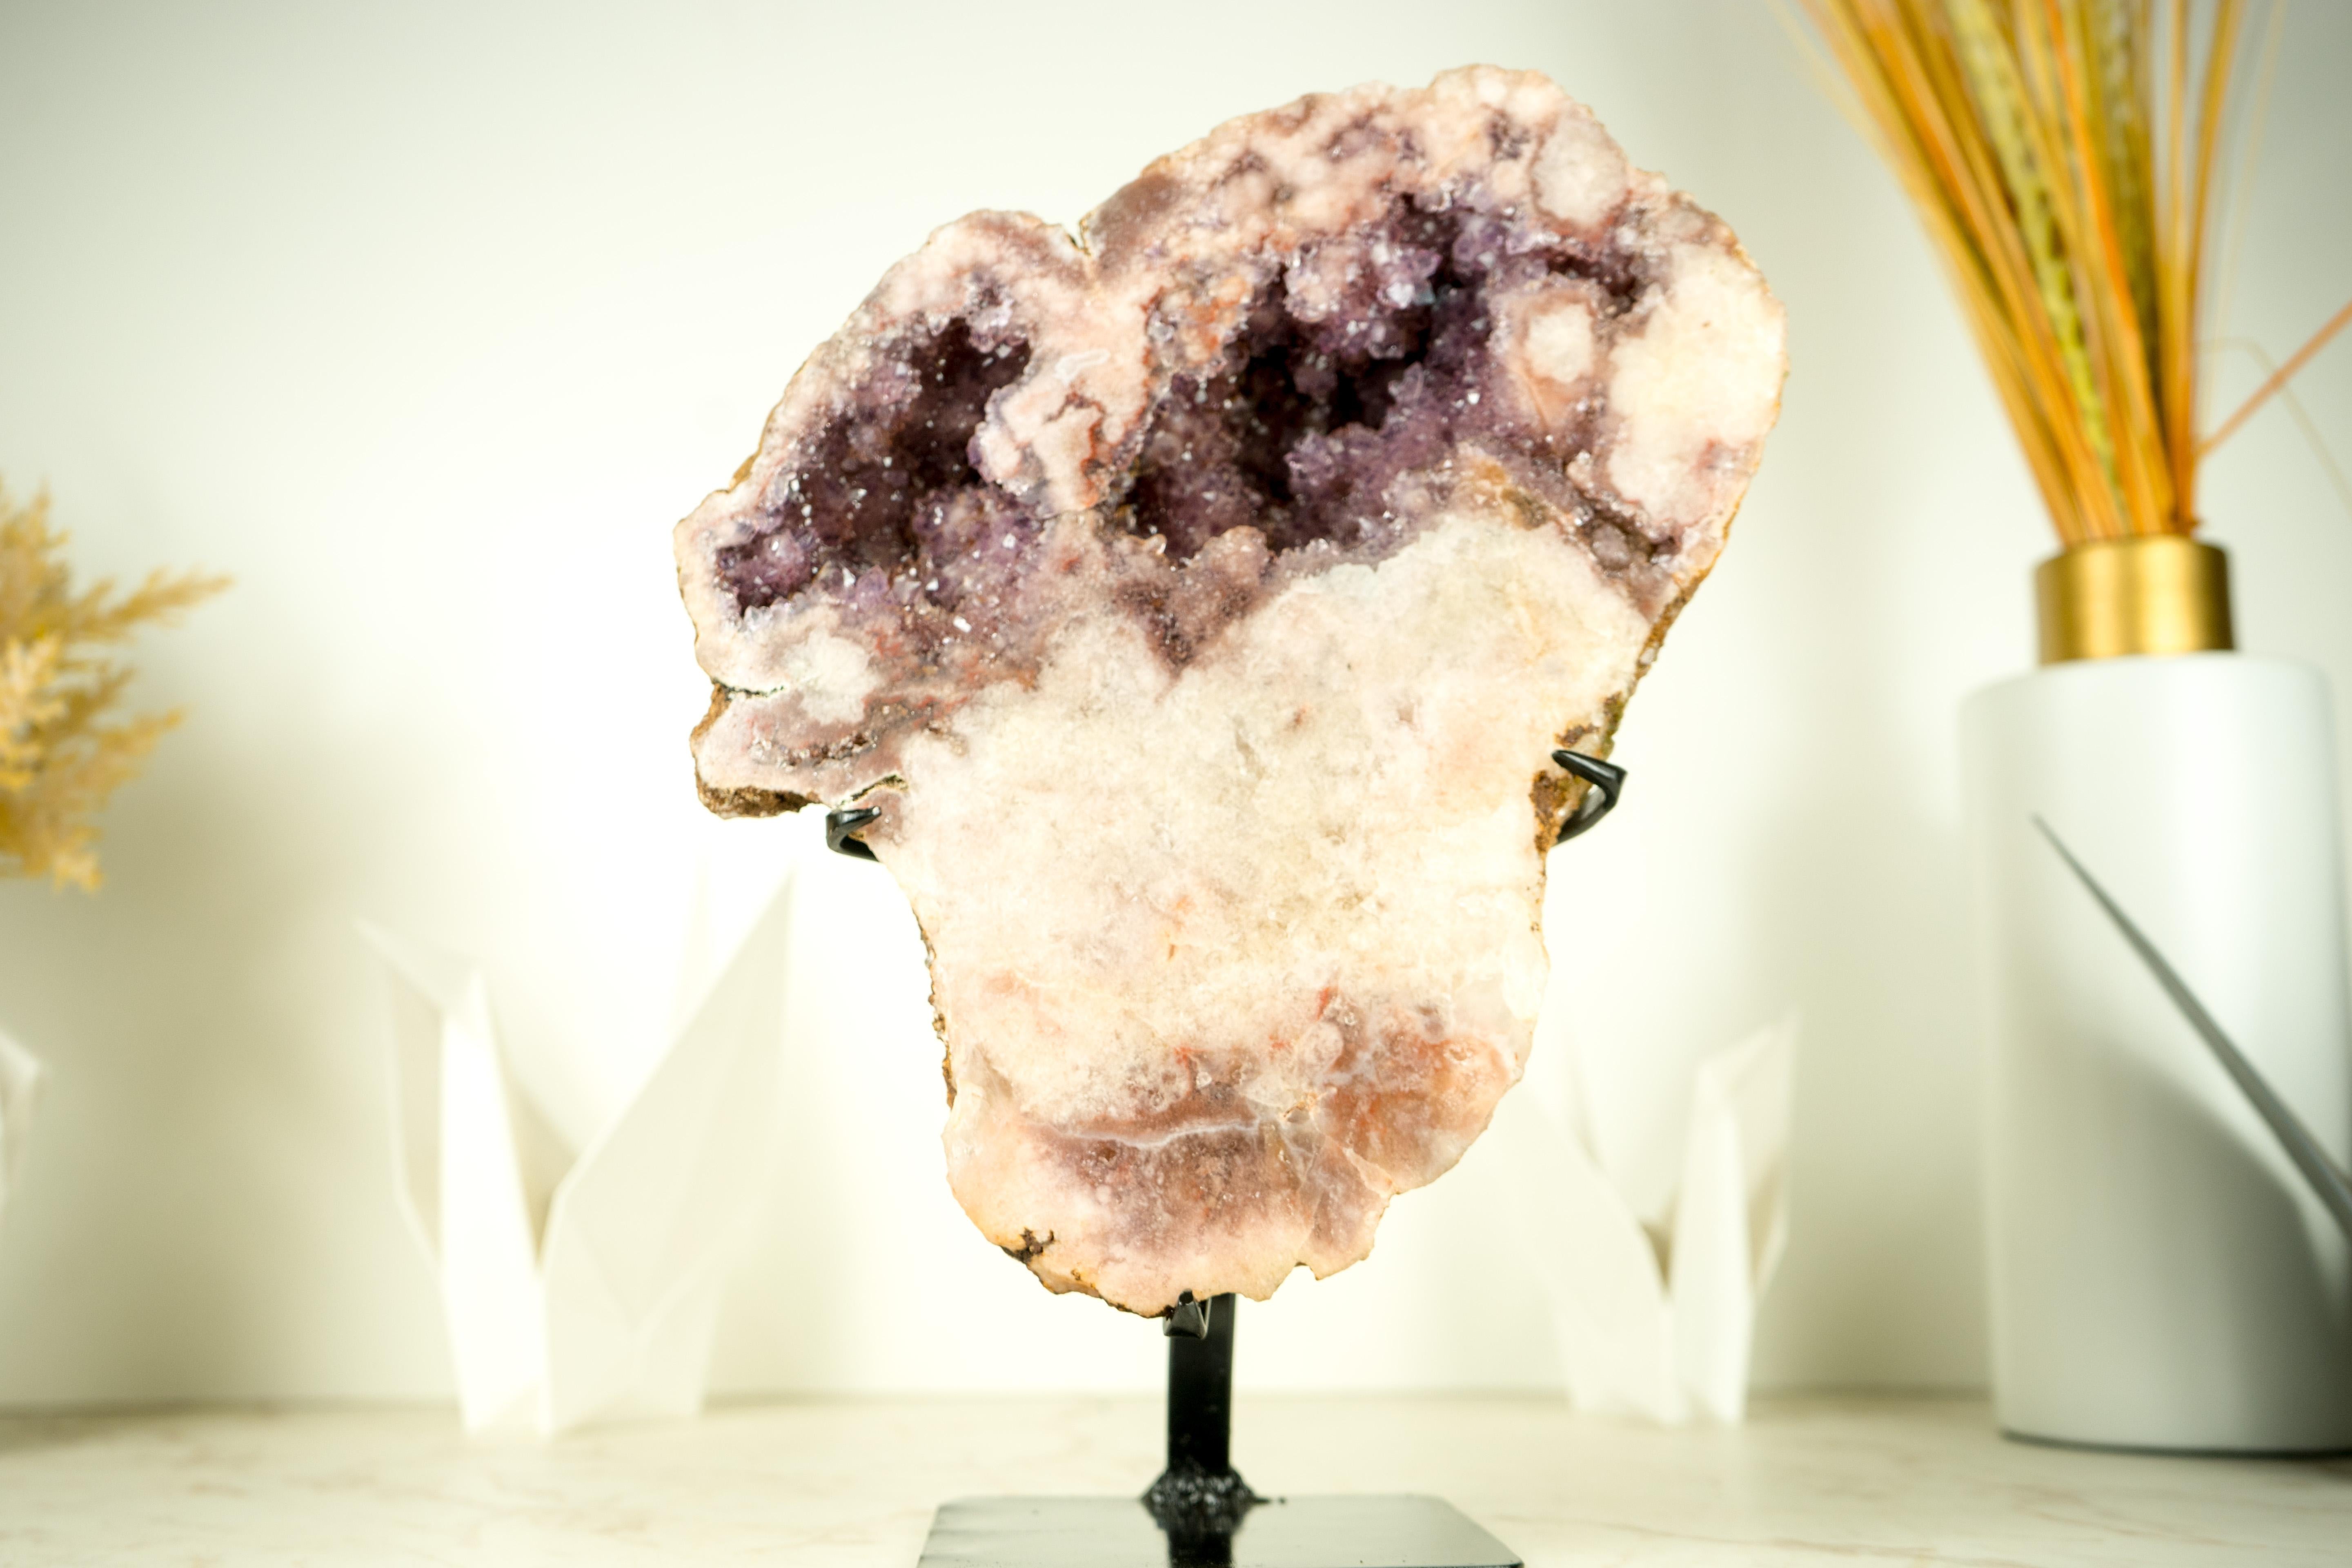 Brazilian High-Grade Pink Amethyst Geode with Sparkly Lavender Rose Amethyst Druzy  For Sale